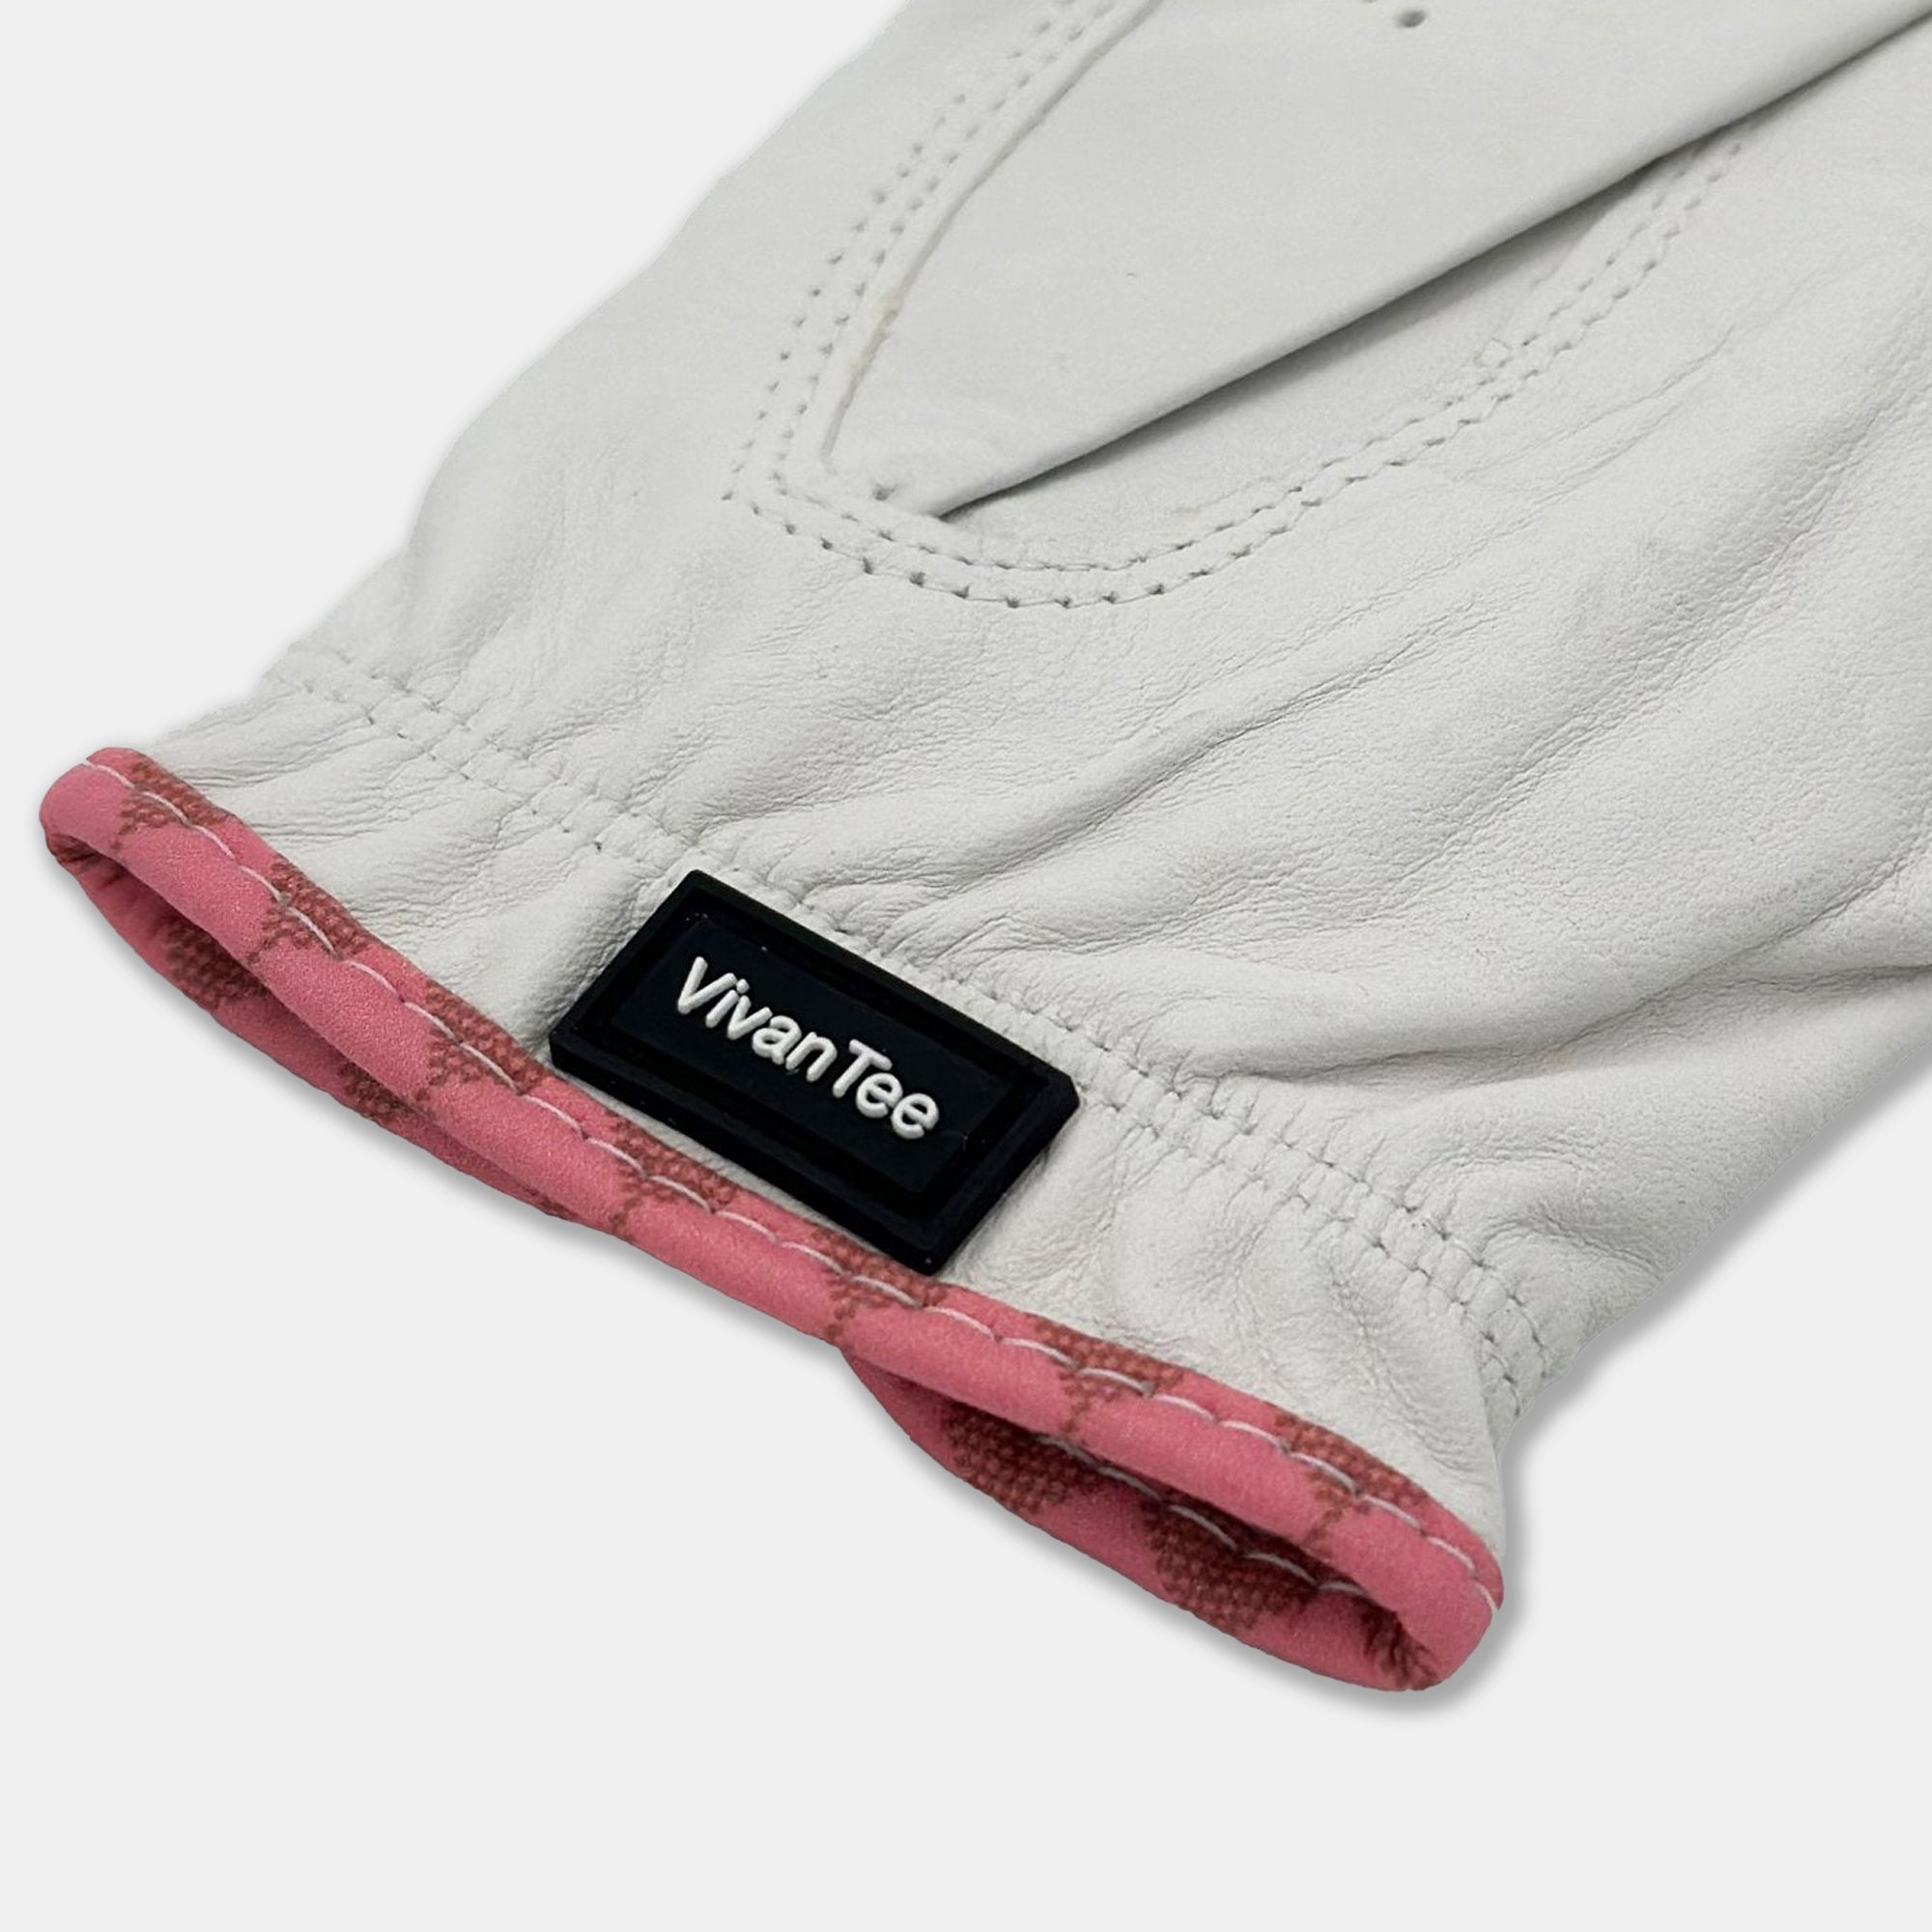 VivanTee pull tab close up on white and pink golf glove.